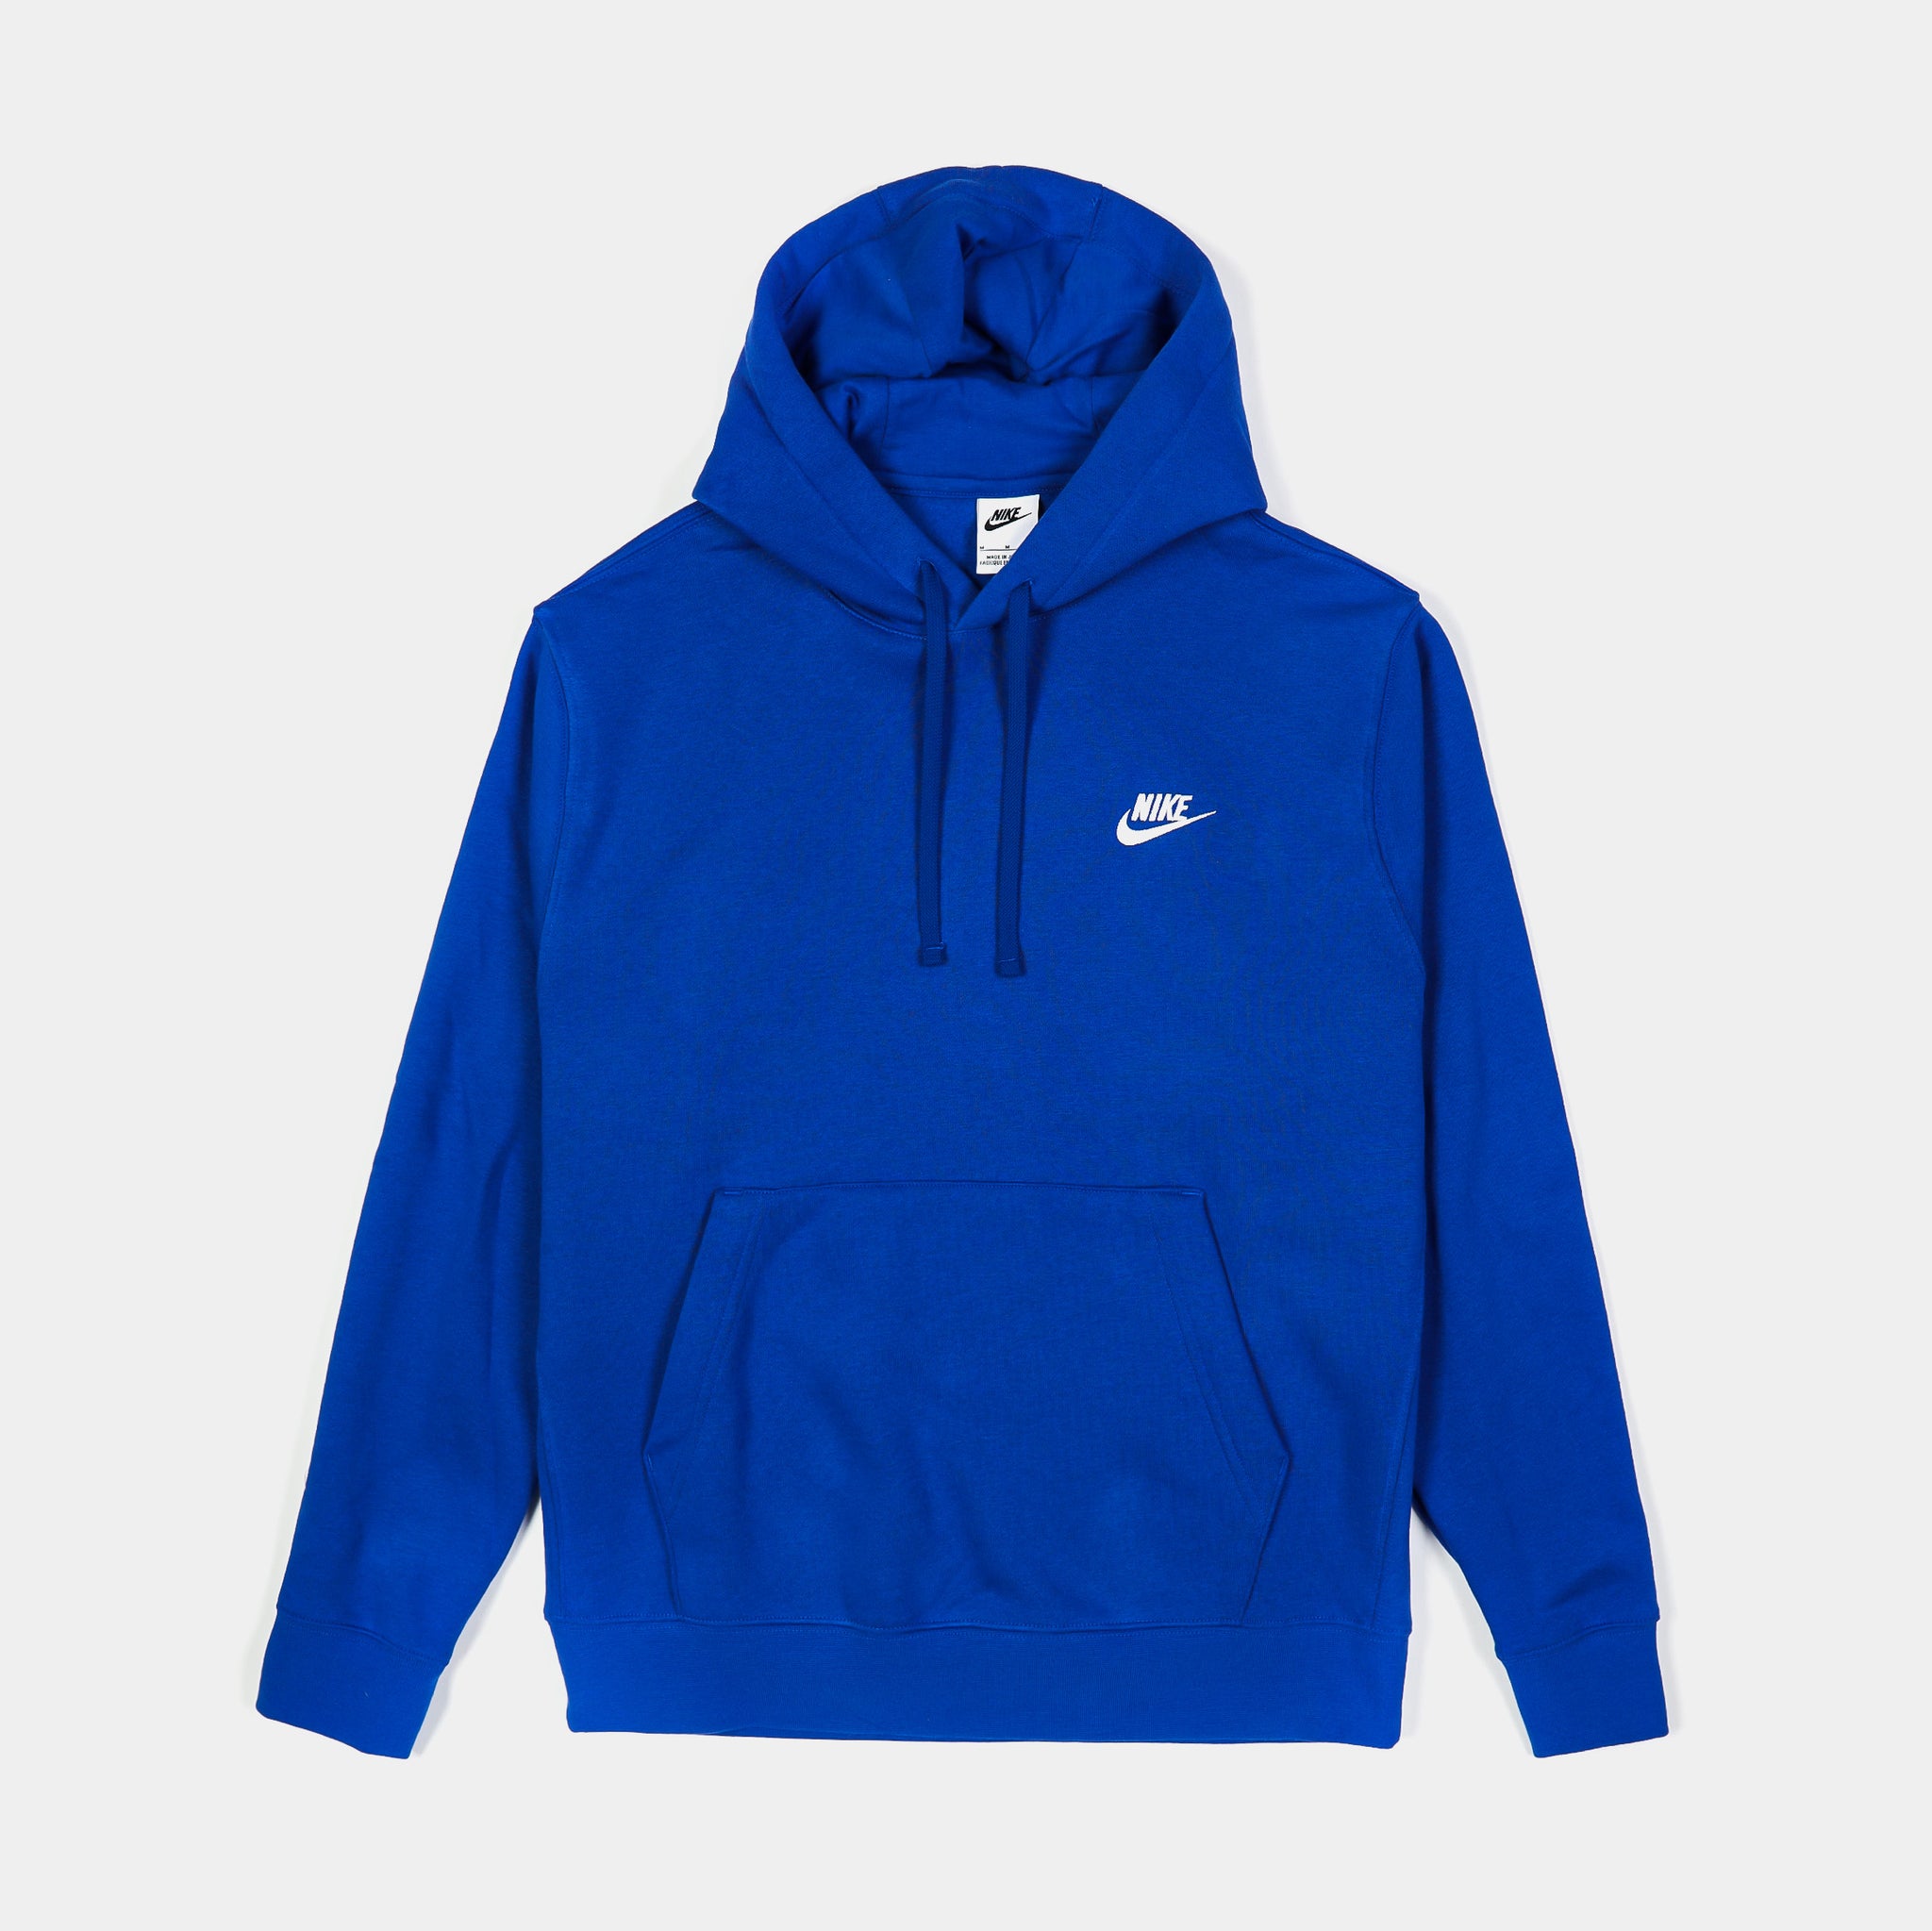 NSW Club Pullover Mens Hoodie (Blue/White)